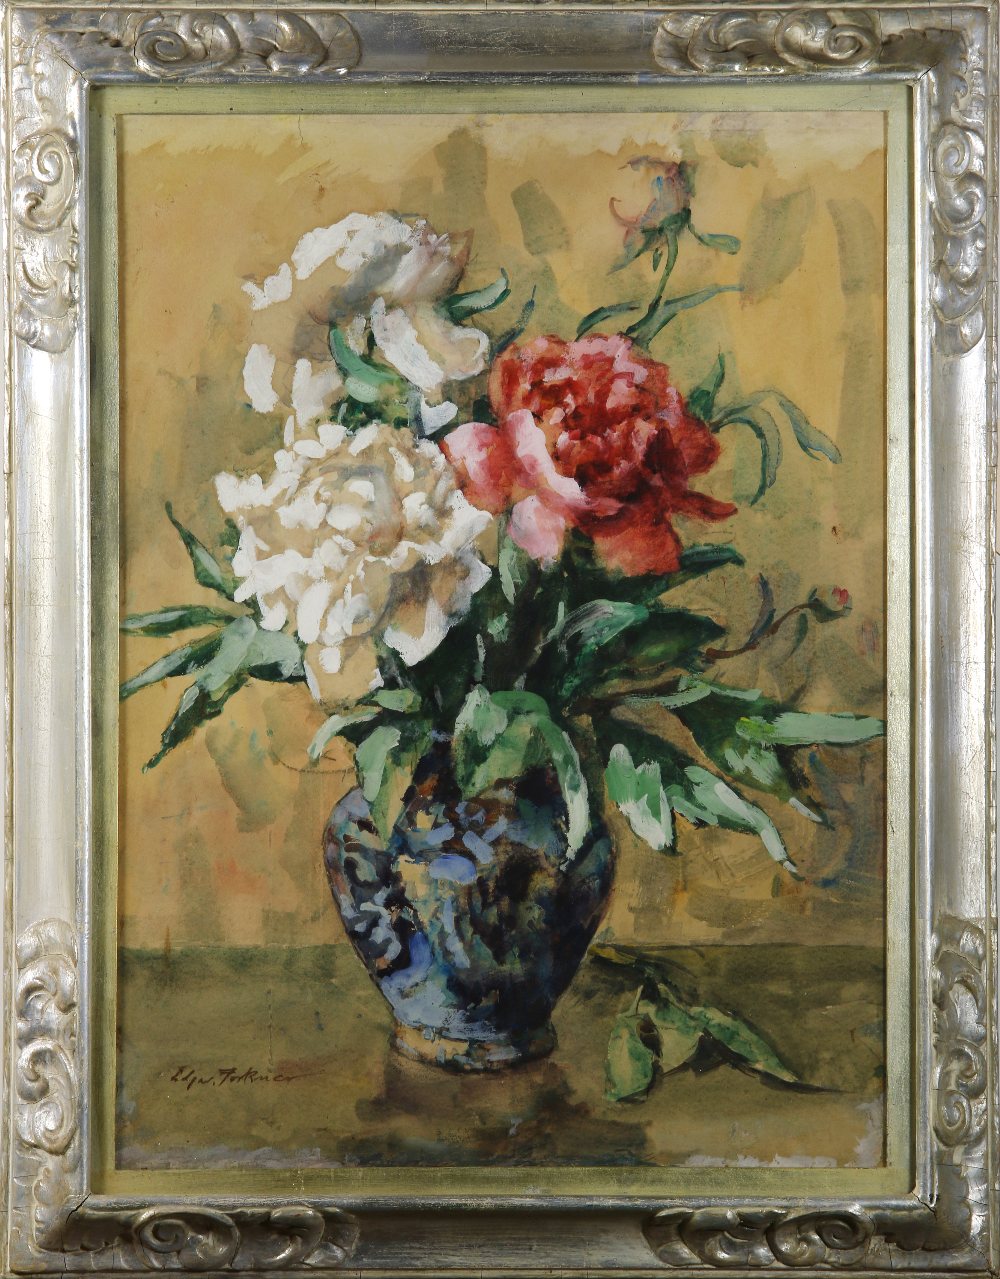 Edgar Forkner (American, 1867 - 1945), Still Life with White and Pink Roses, watercolor and gouache,